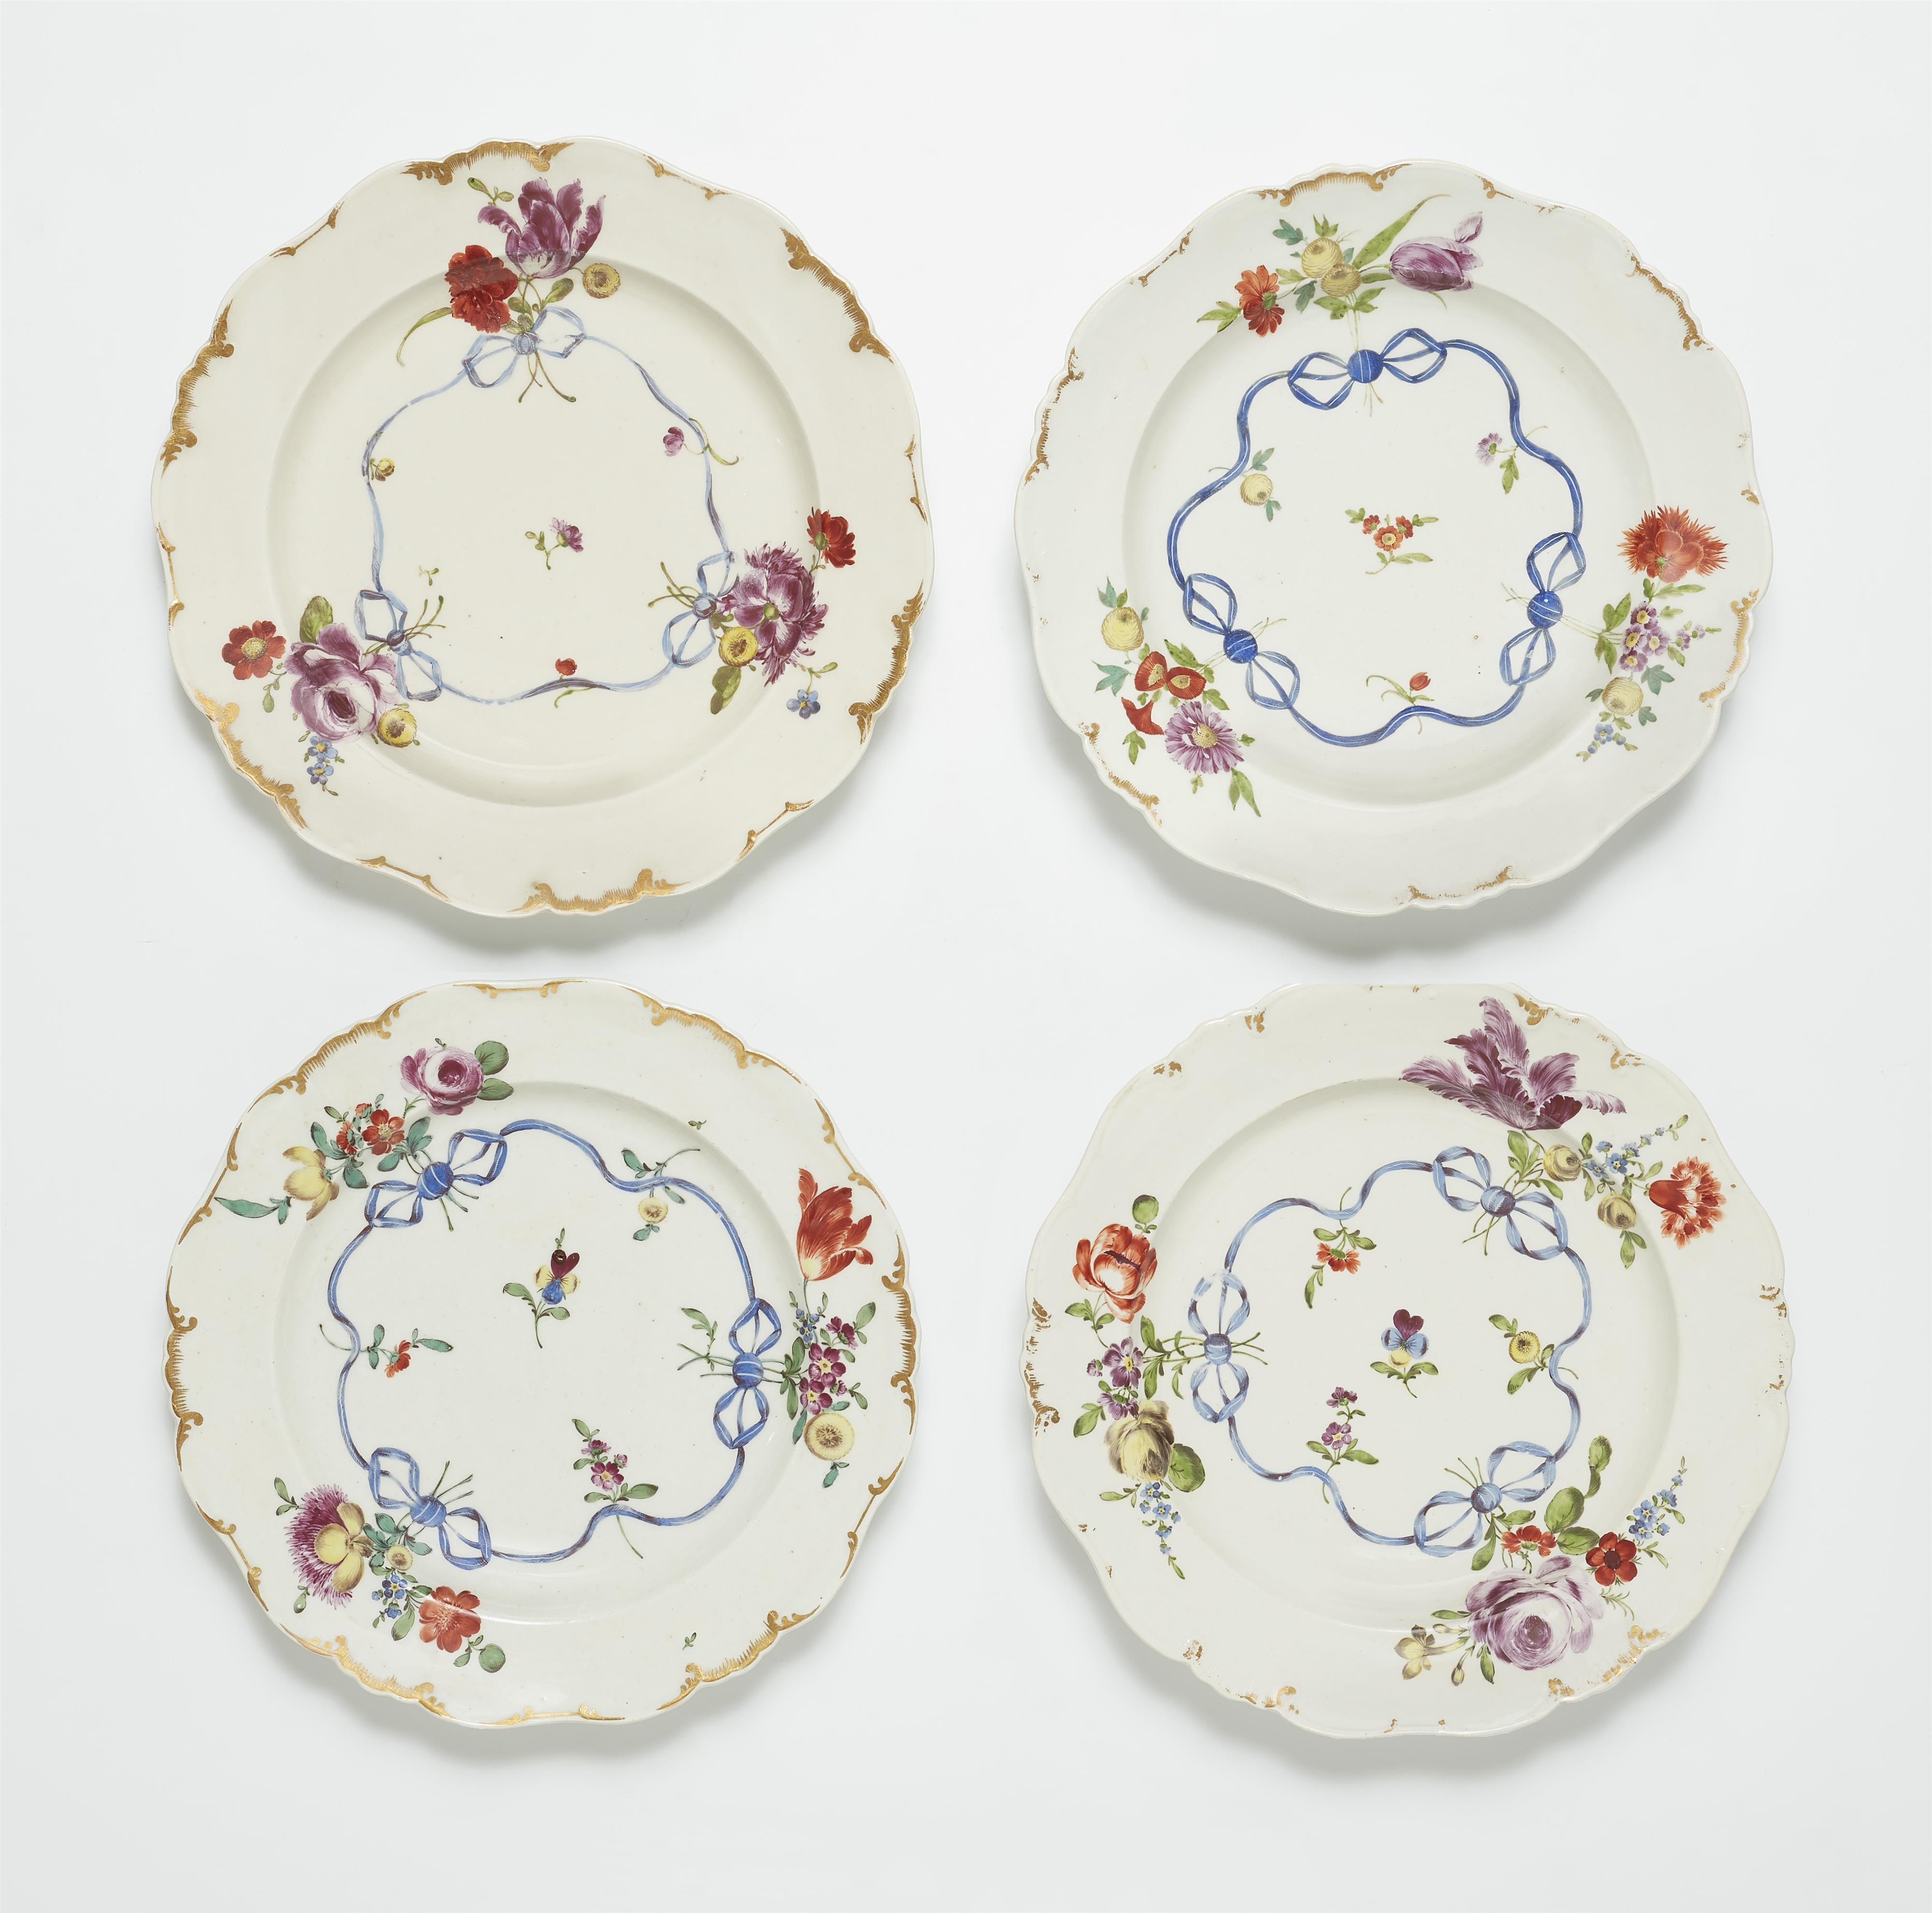 Four Ludwigsburg porcelain dinner plates from the service with blue ribbon decor - image-1